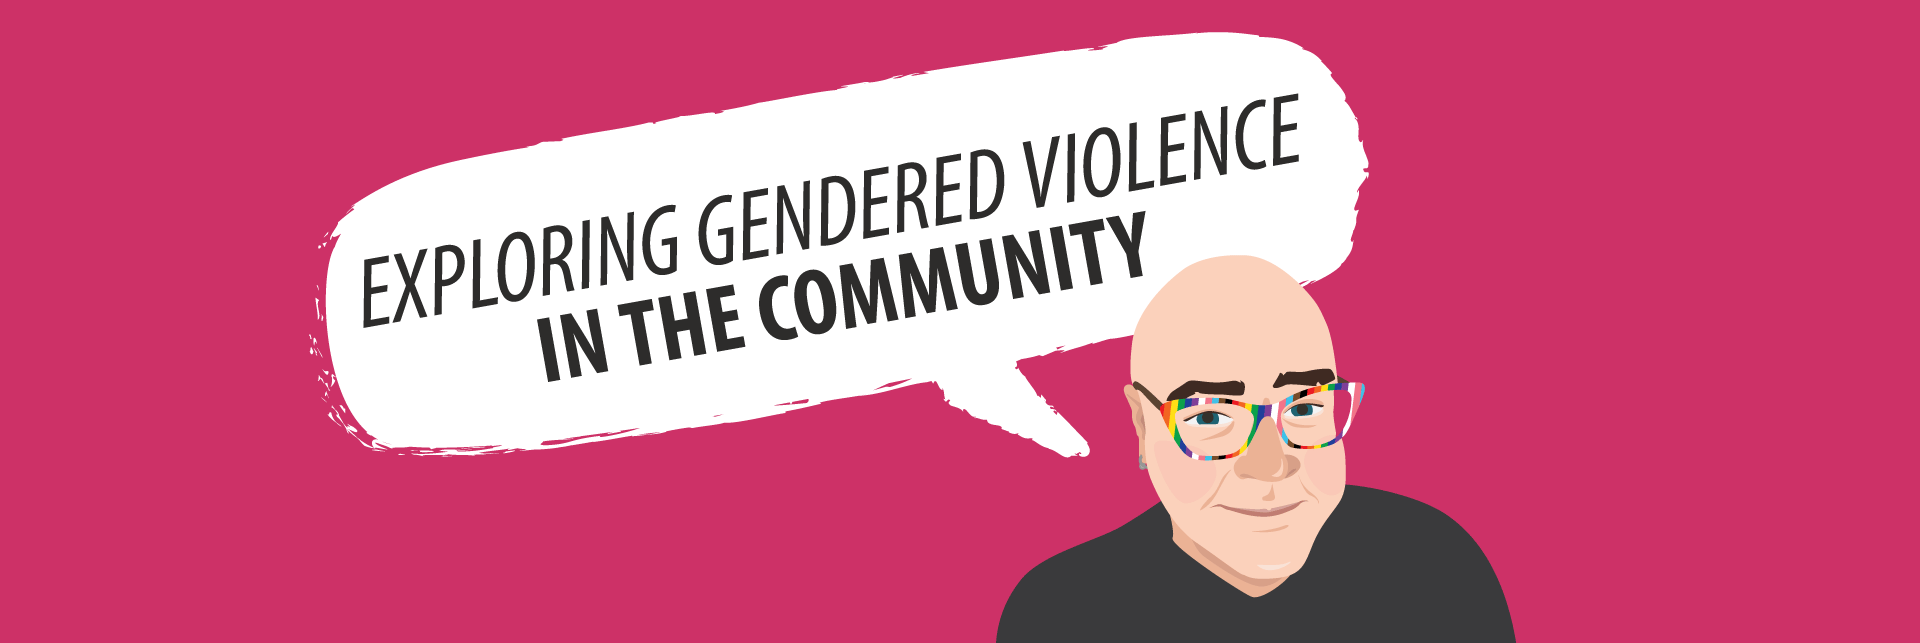 Text bubble coming from illustration of workshop leader - Derek. Text reads "Exploring Gendered Violence in the Community."